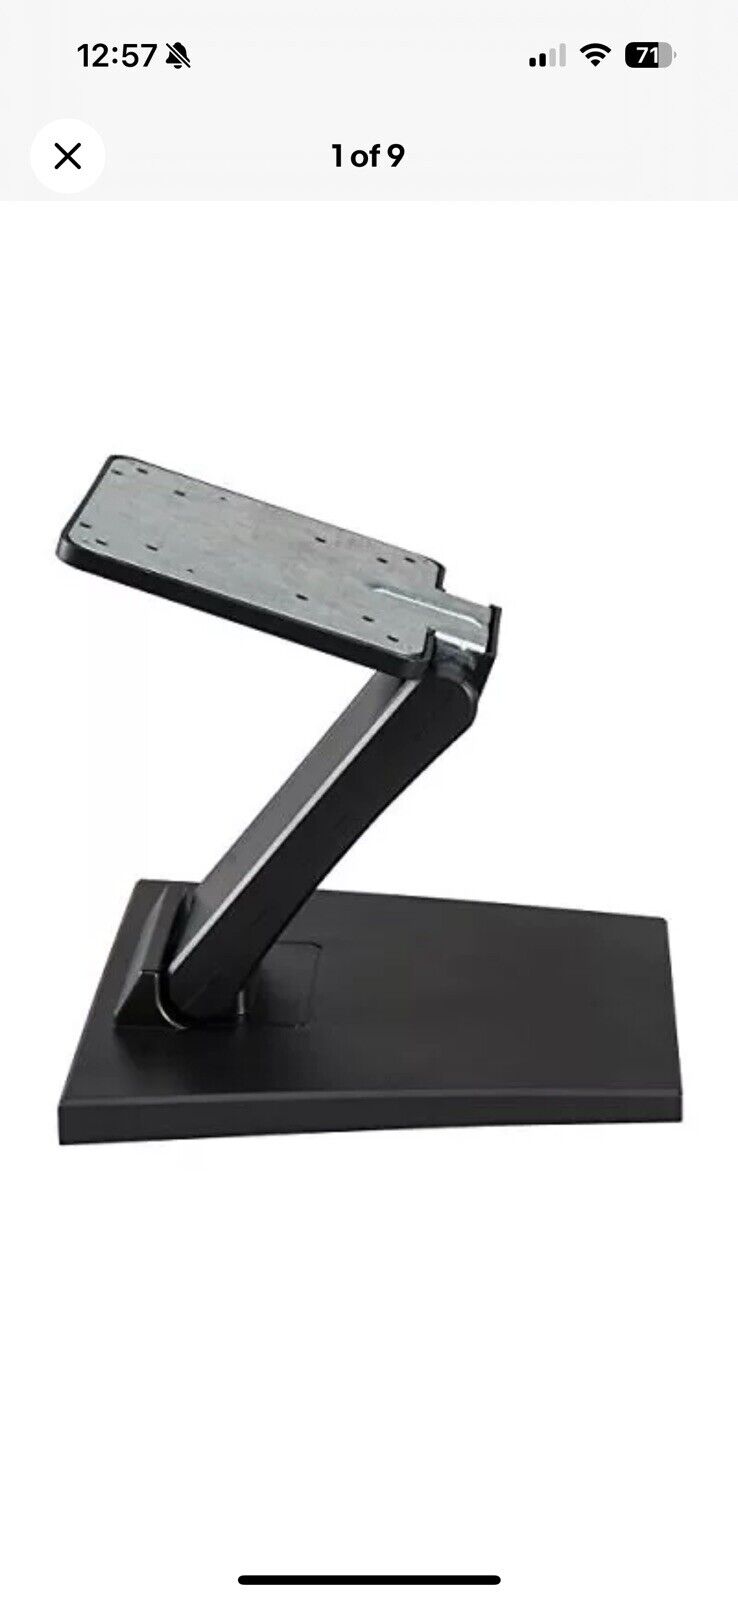 Wearson WS-03A Adjustable LCD TV Stand Folding Metal Monitor Desk Stand with ...